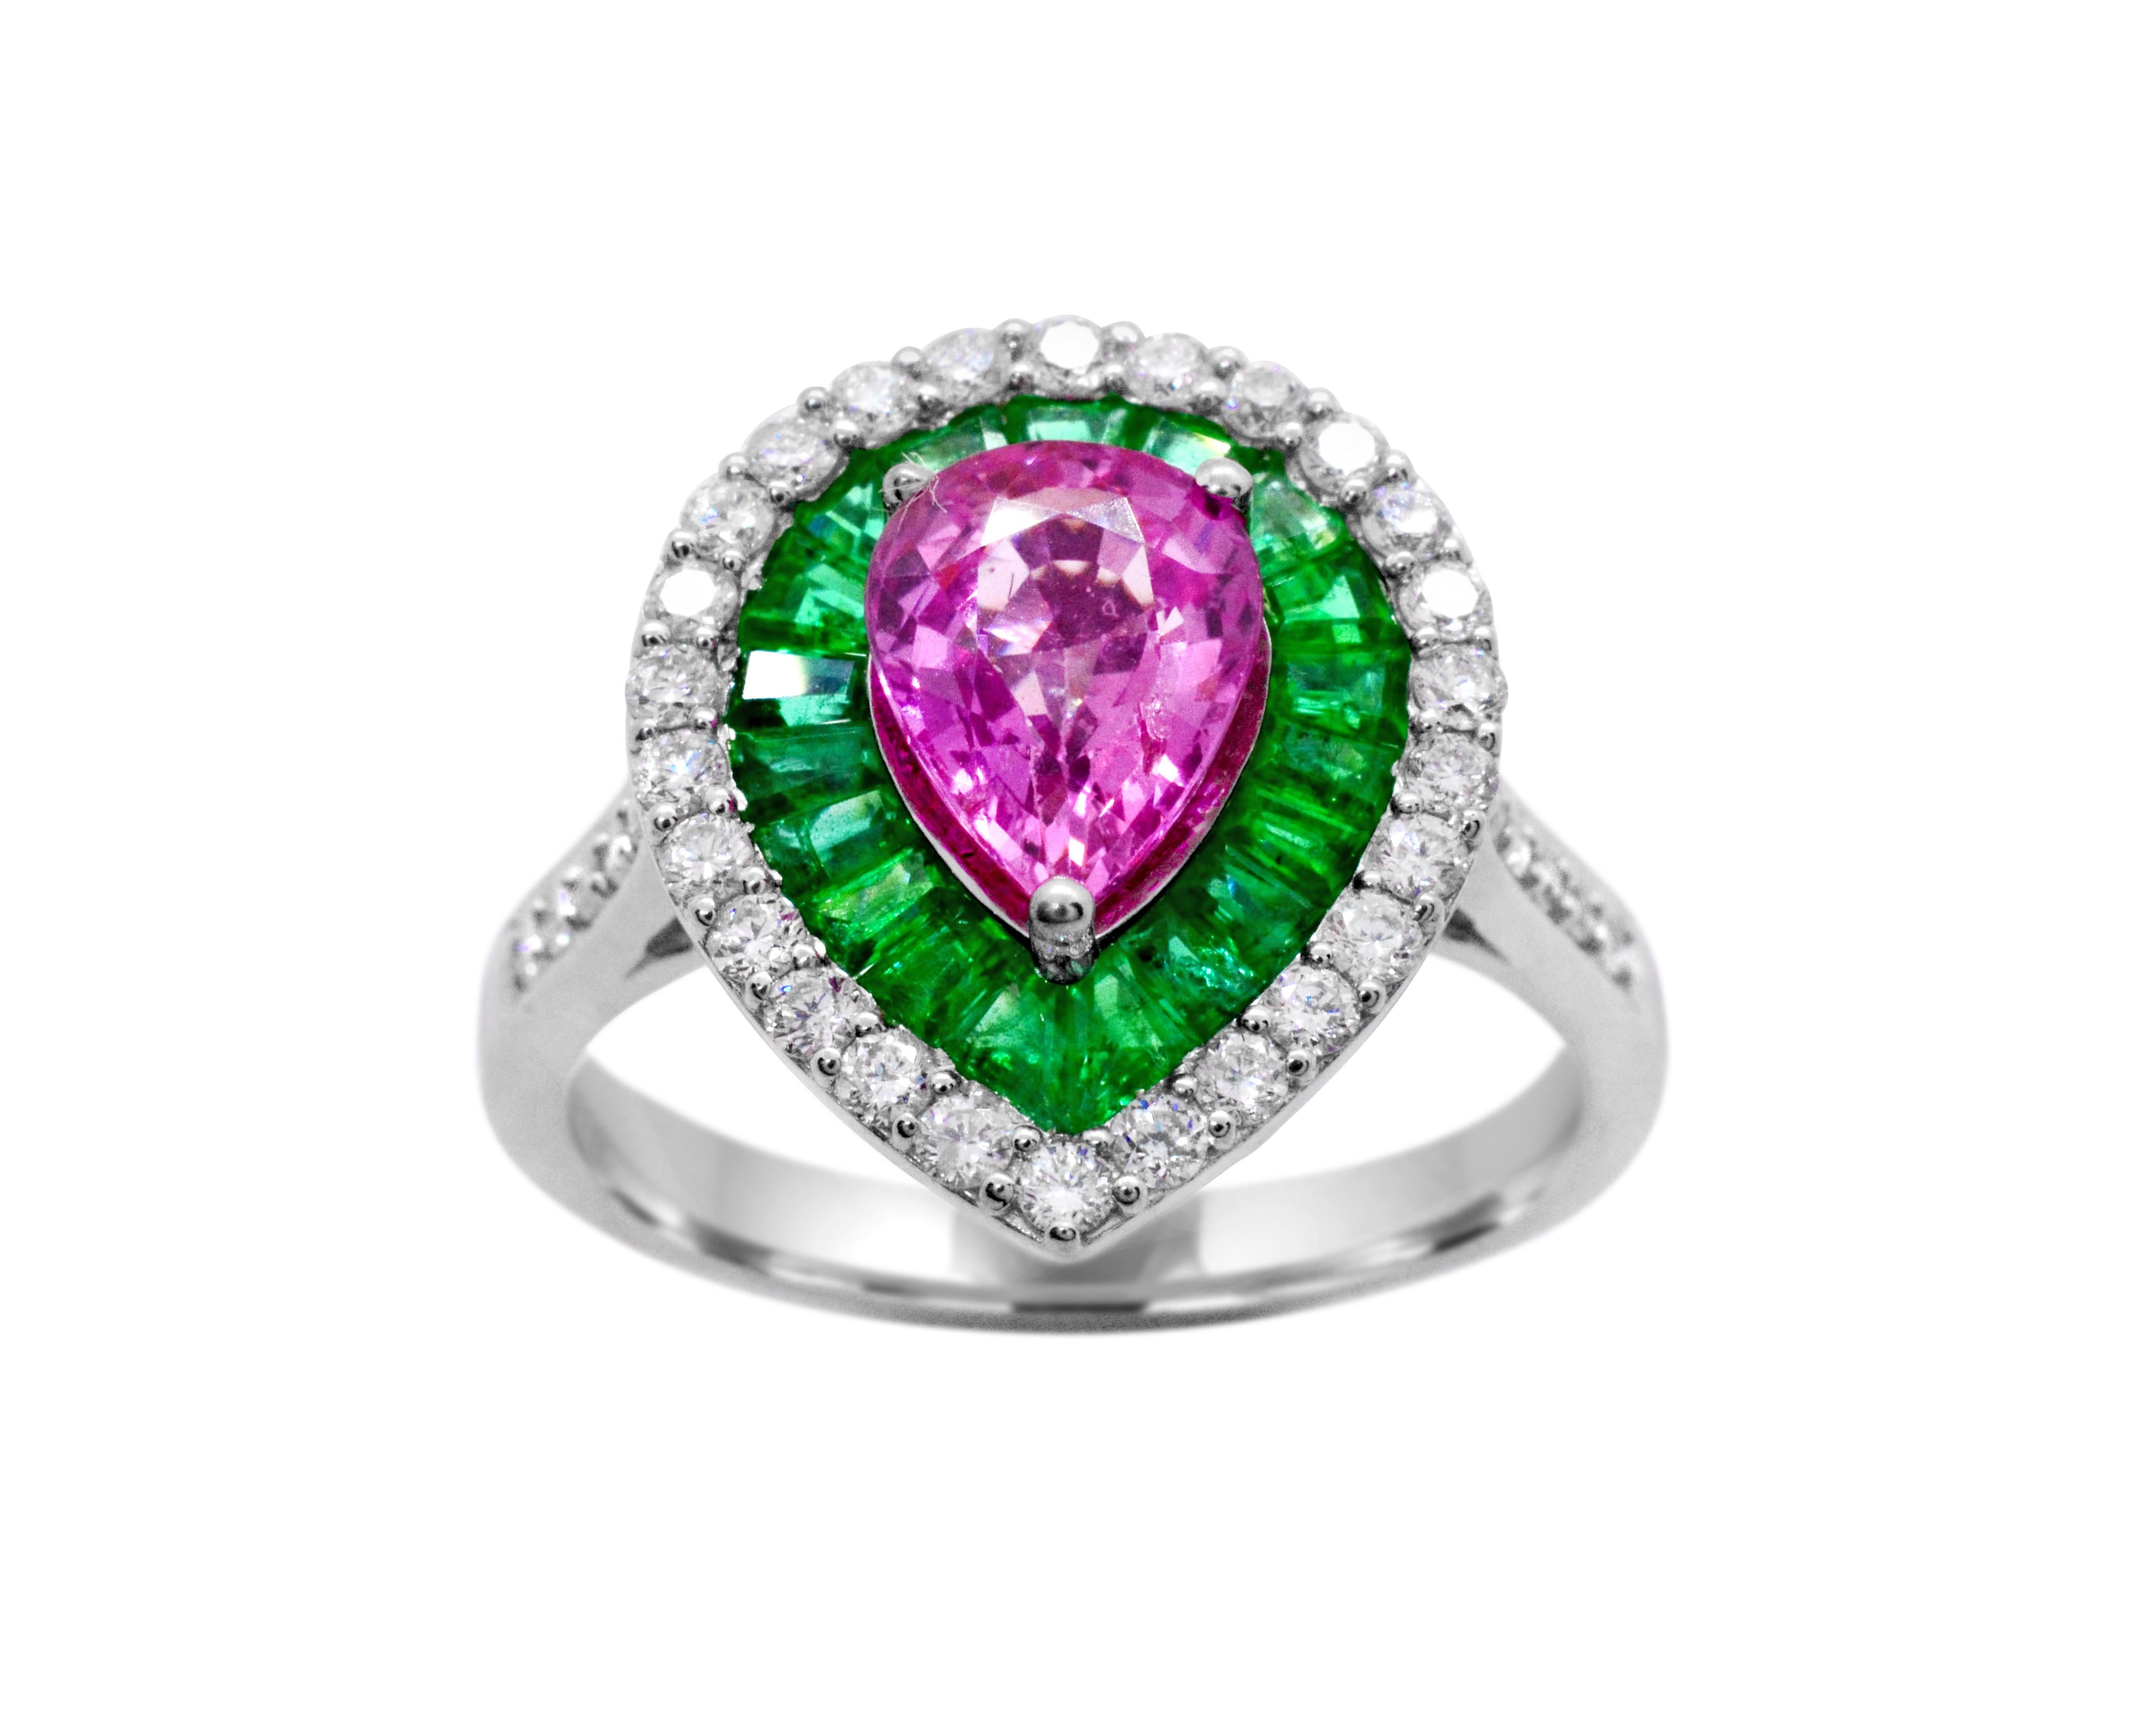 Stunning and vibrant color.  This 1.60 carat pear-shaped Madagascar pink sapphire is framed by 1.55 carat of Zambian baguette Emeralds.  Diamonds of G-I color. Total 0.46 carat weight.  These diamonds halo the center gemstones and continue to run